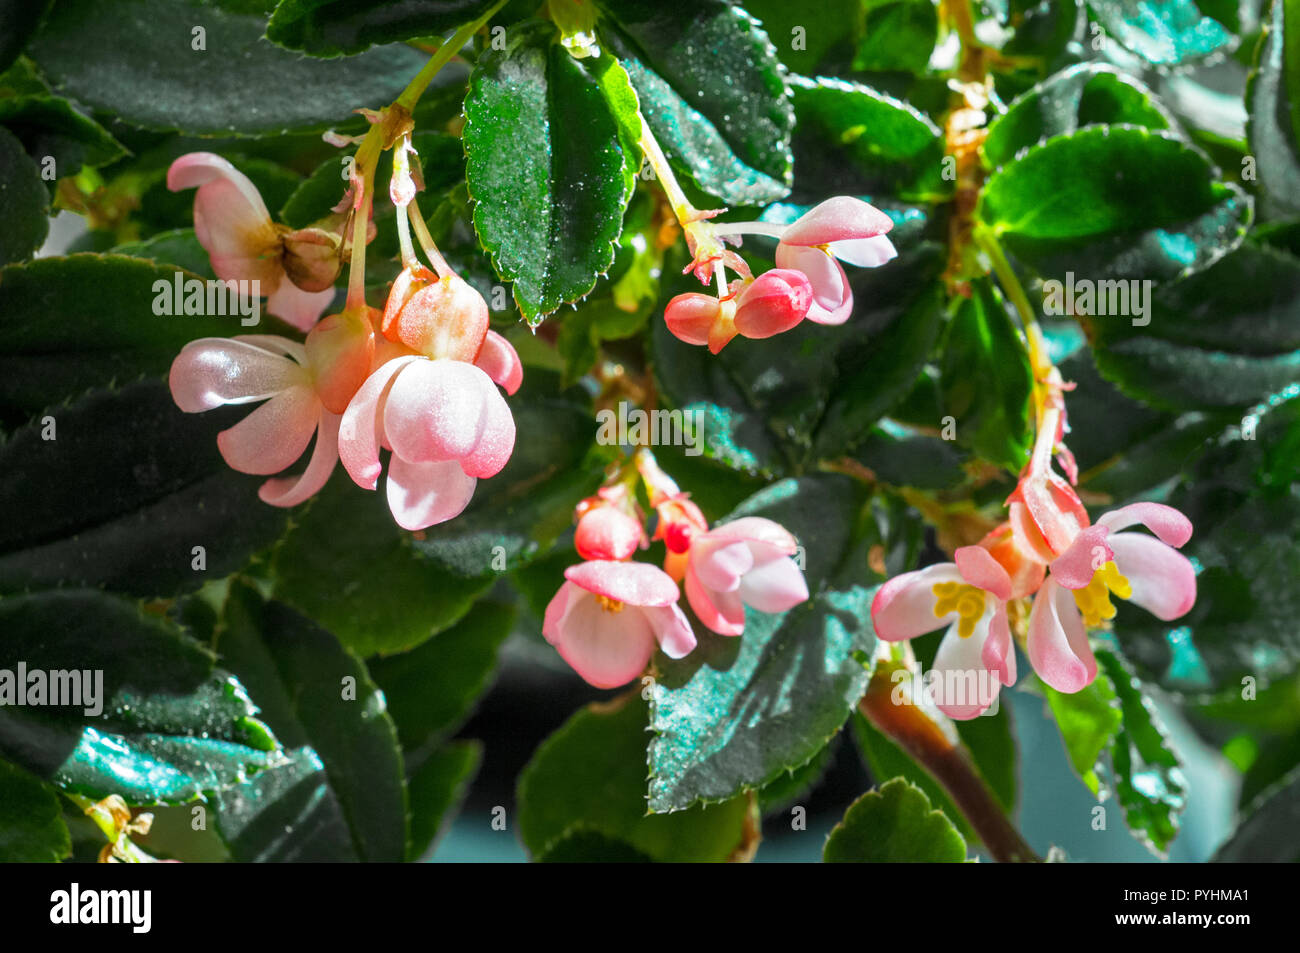 Begonia fuchsioides also called Fuchsia Begonia are a summer flowering Begonia with small pink flowers. Best grown indoors at 15-20o C . Stock Photo